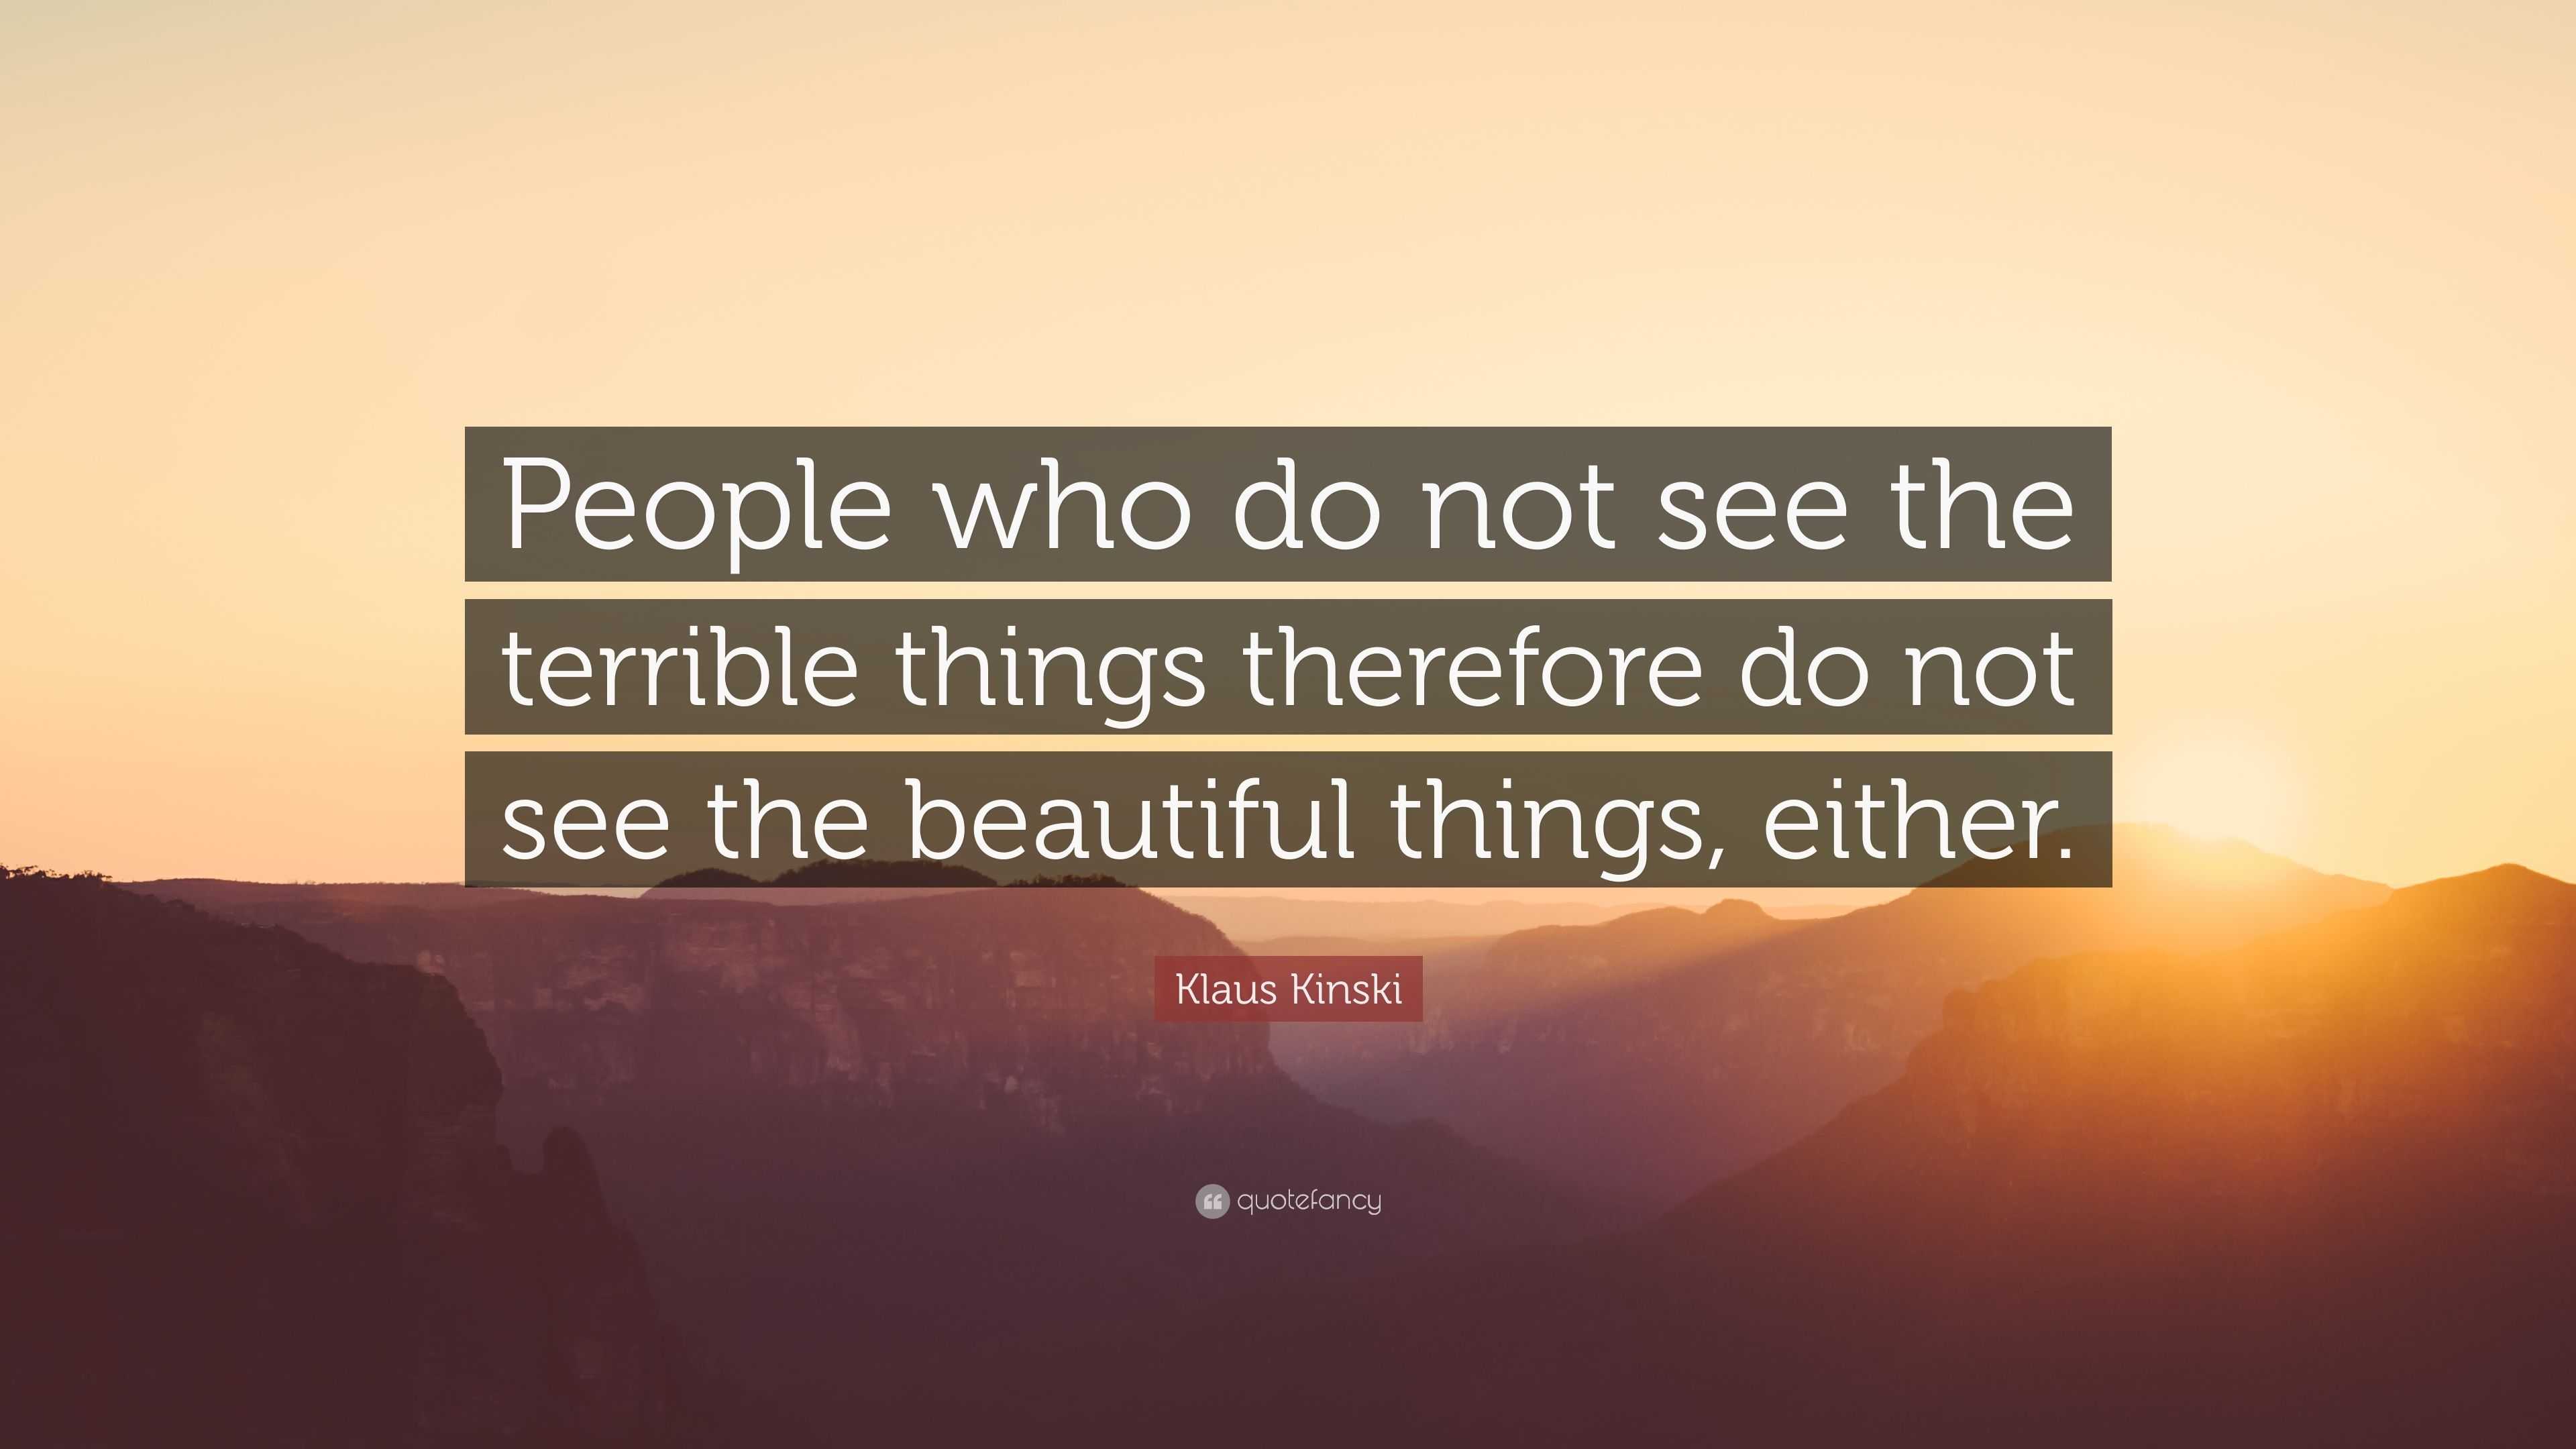 Klaus Kinski Quote: “People who do not see the terrible things ...